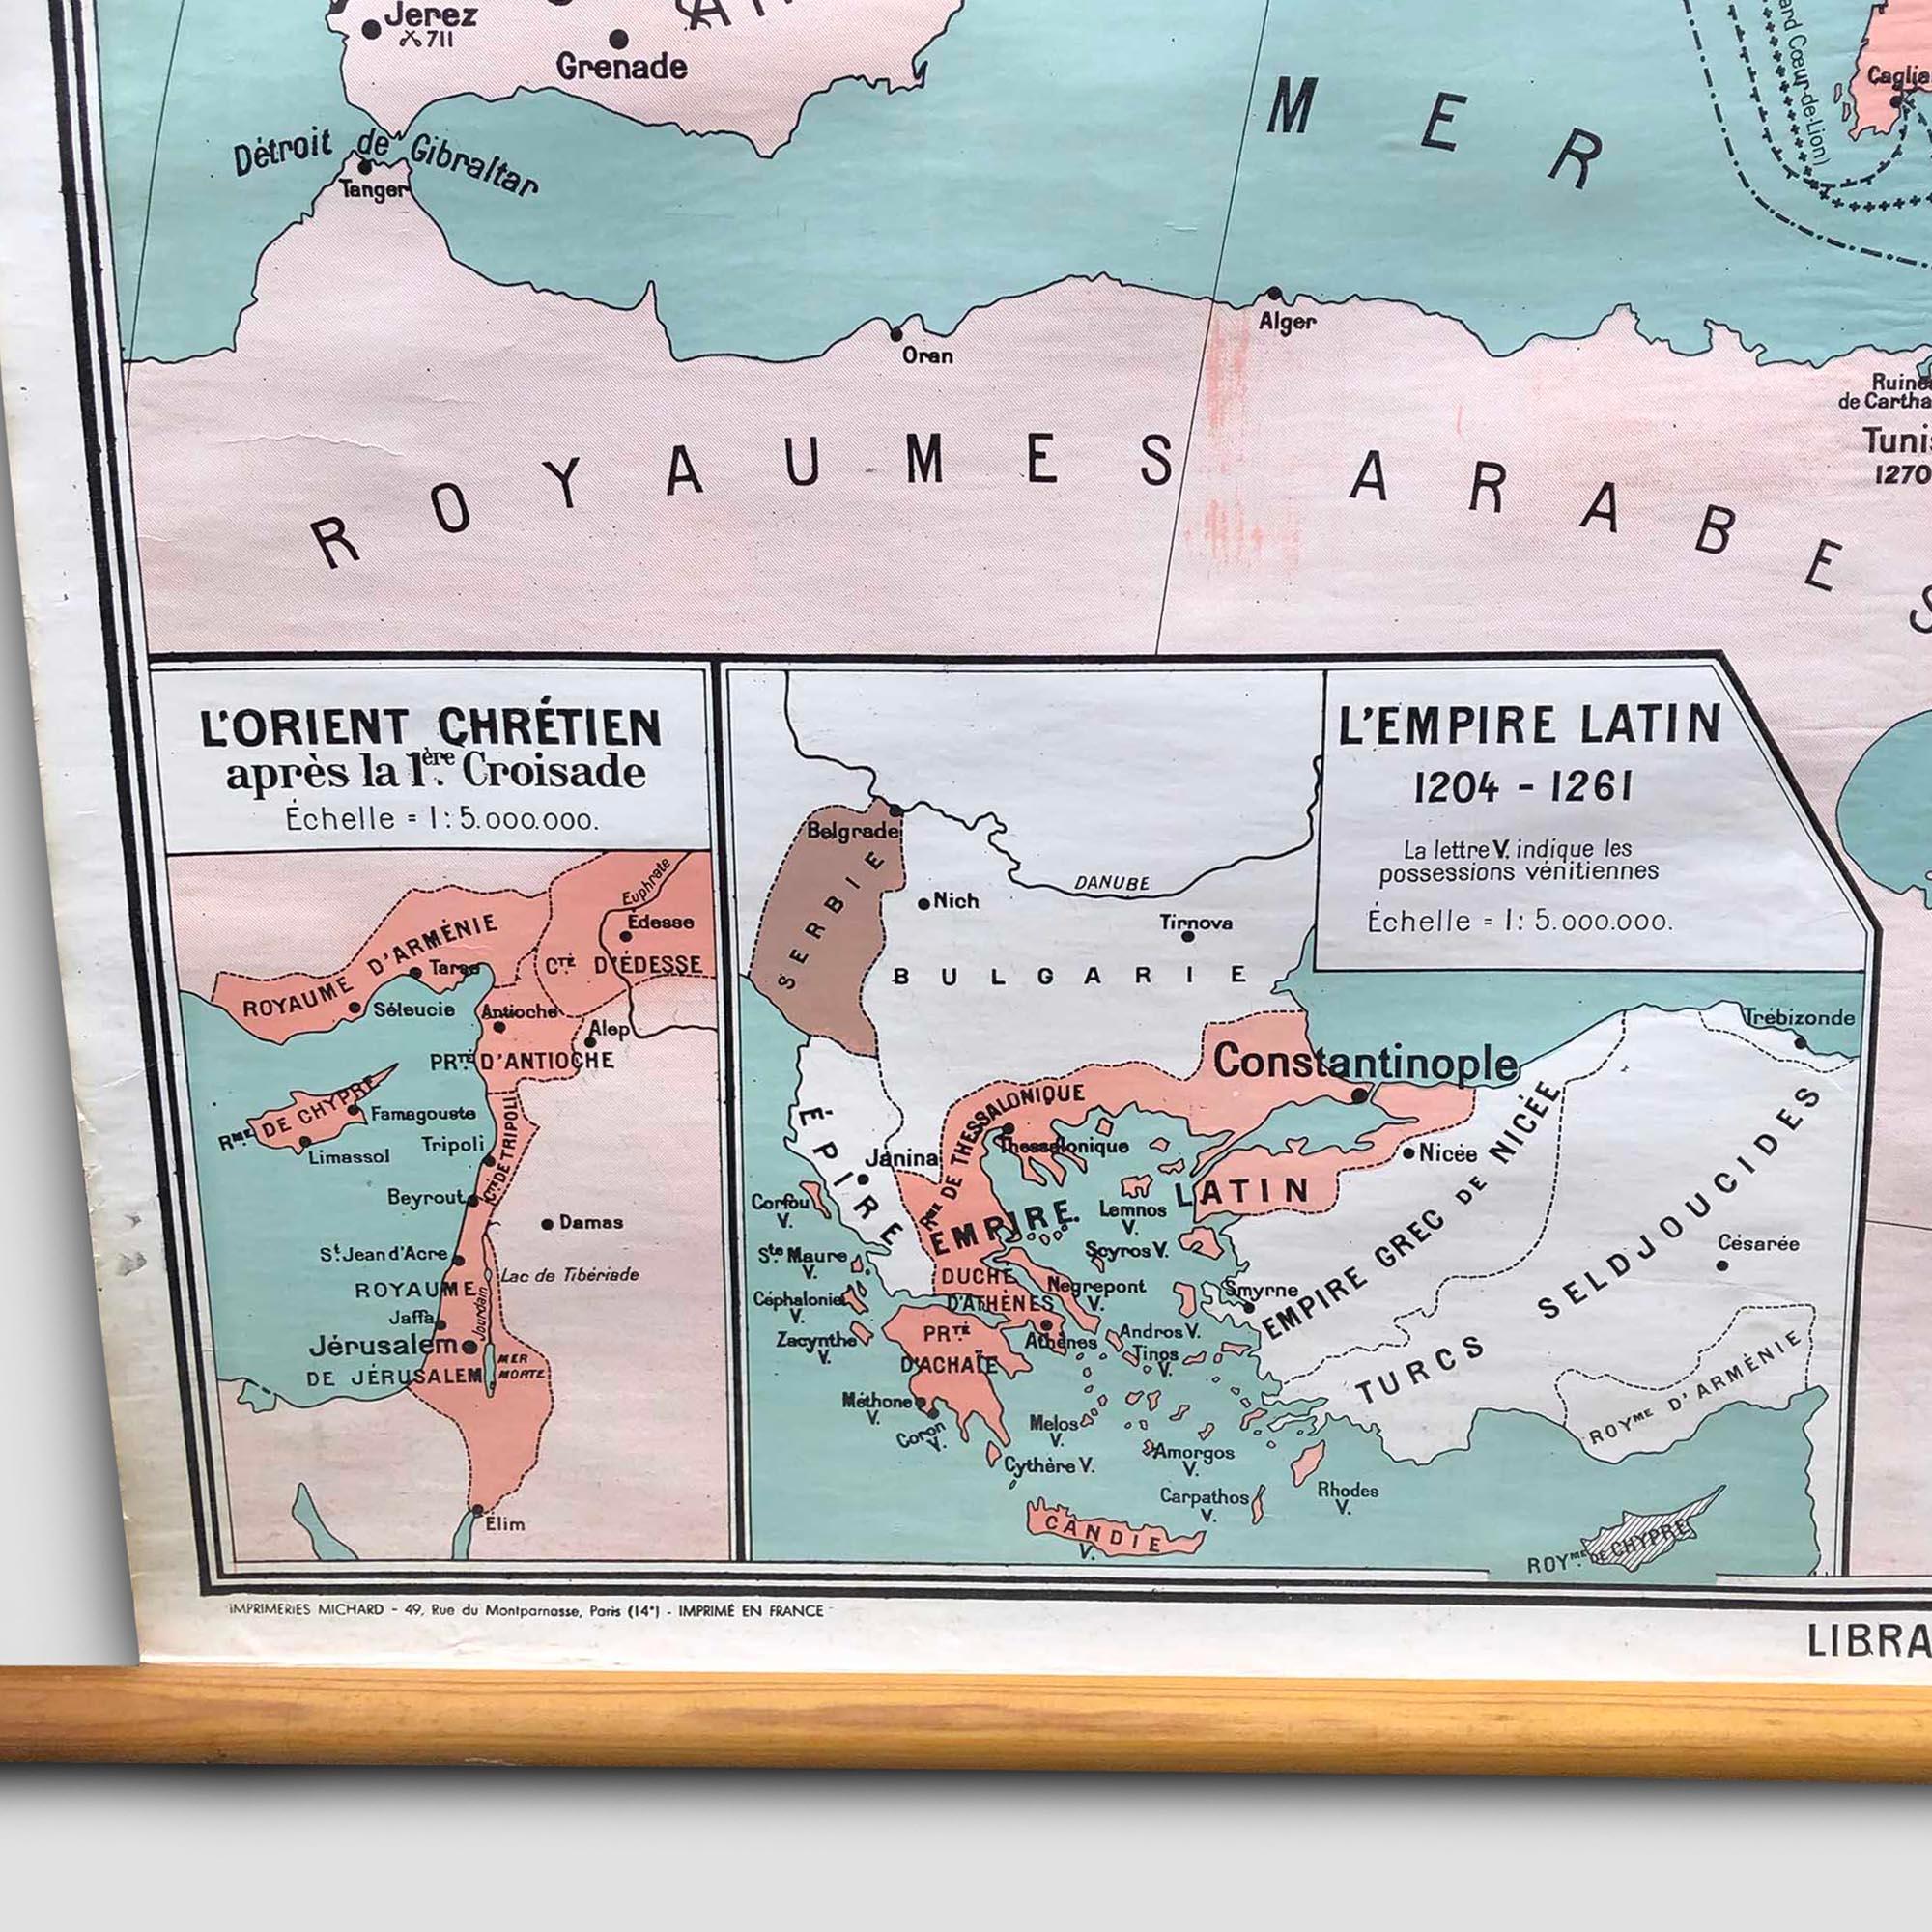 A beautiful, original vintage map of the crusades ('Les Croisades') in the early Middle Ages in Europe, North Africa, and the Middle East. This pull-down map was used in European schools for teaching purposes. It has a splendid color design and